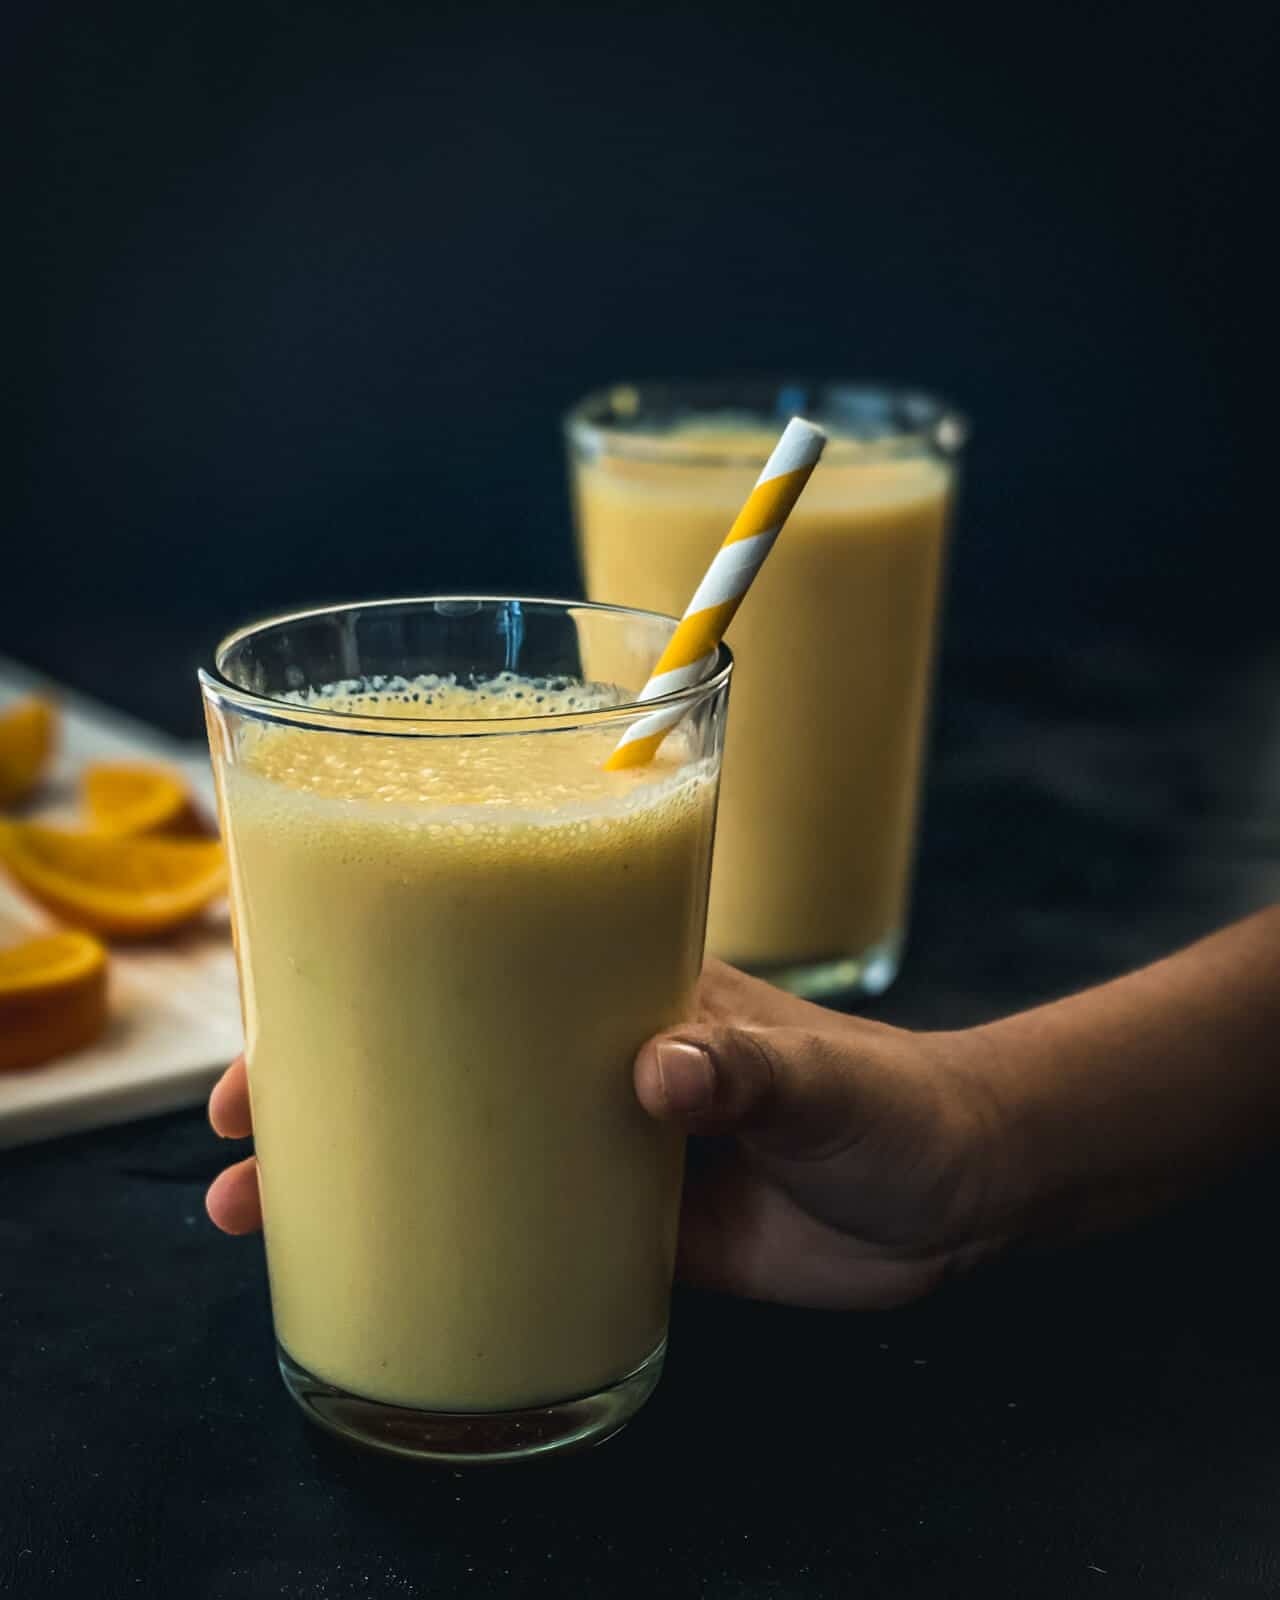 Two glasses of orange smoothie on a counter with a hand holding the front glass with a white and yellow straw.